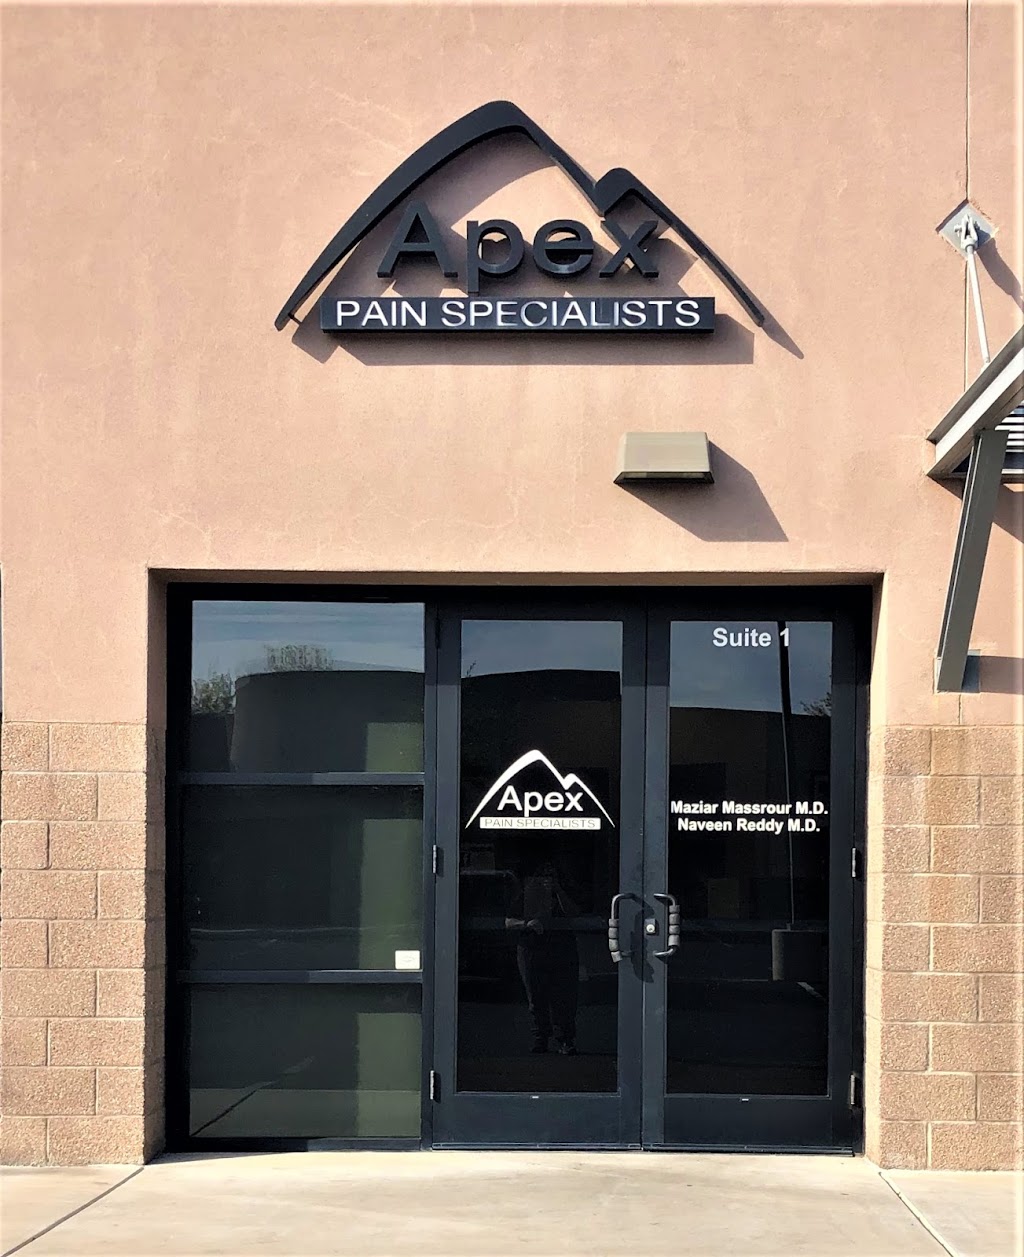 Apex Pain Specialists: Spine, Sports & Pain Management | 2705 S Alma School Rd #1, Chandler, AZ 85286, USA | Phone: (480) 820-7246